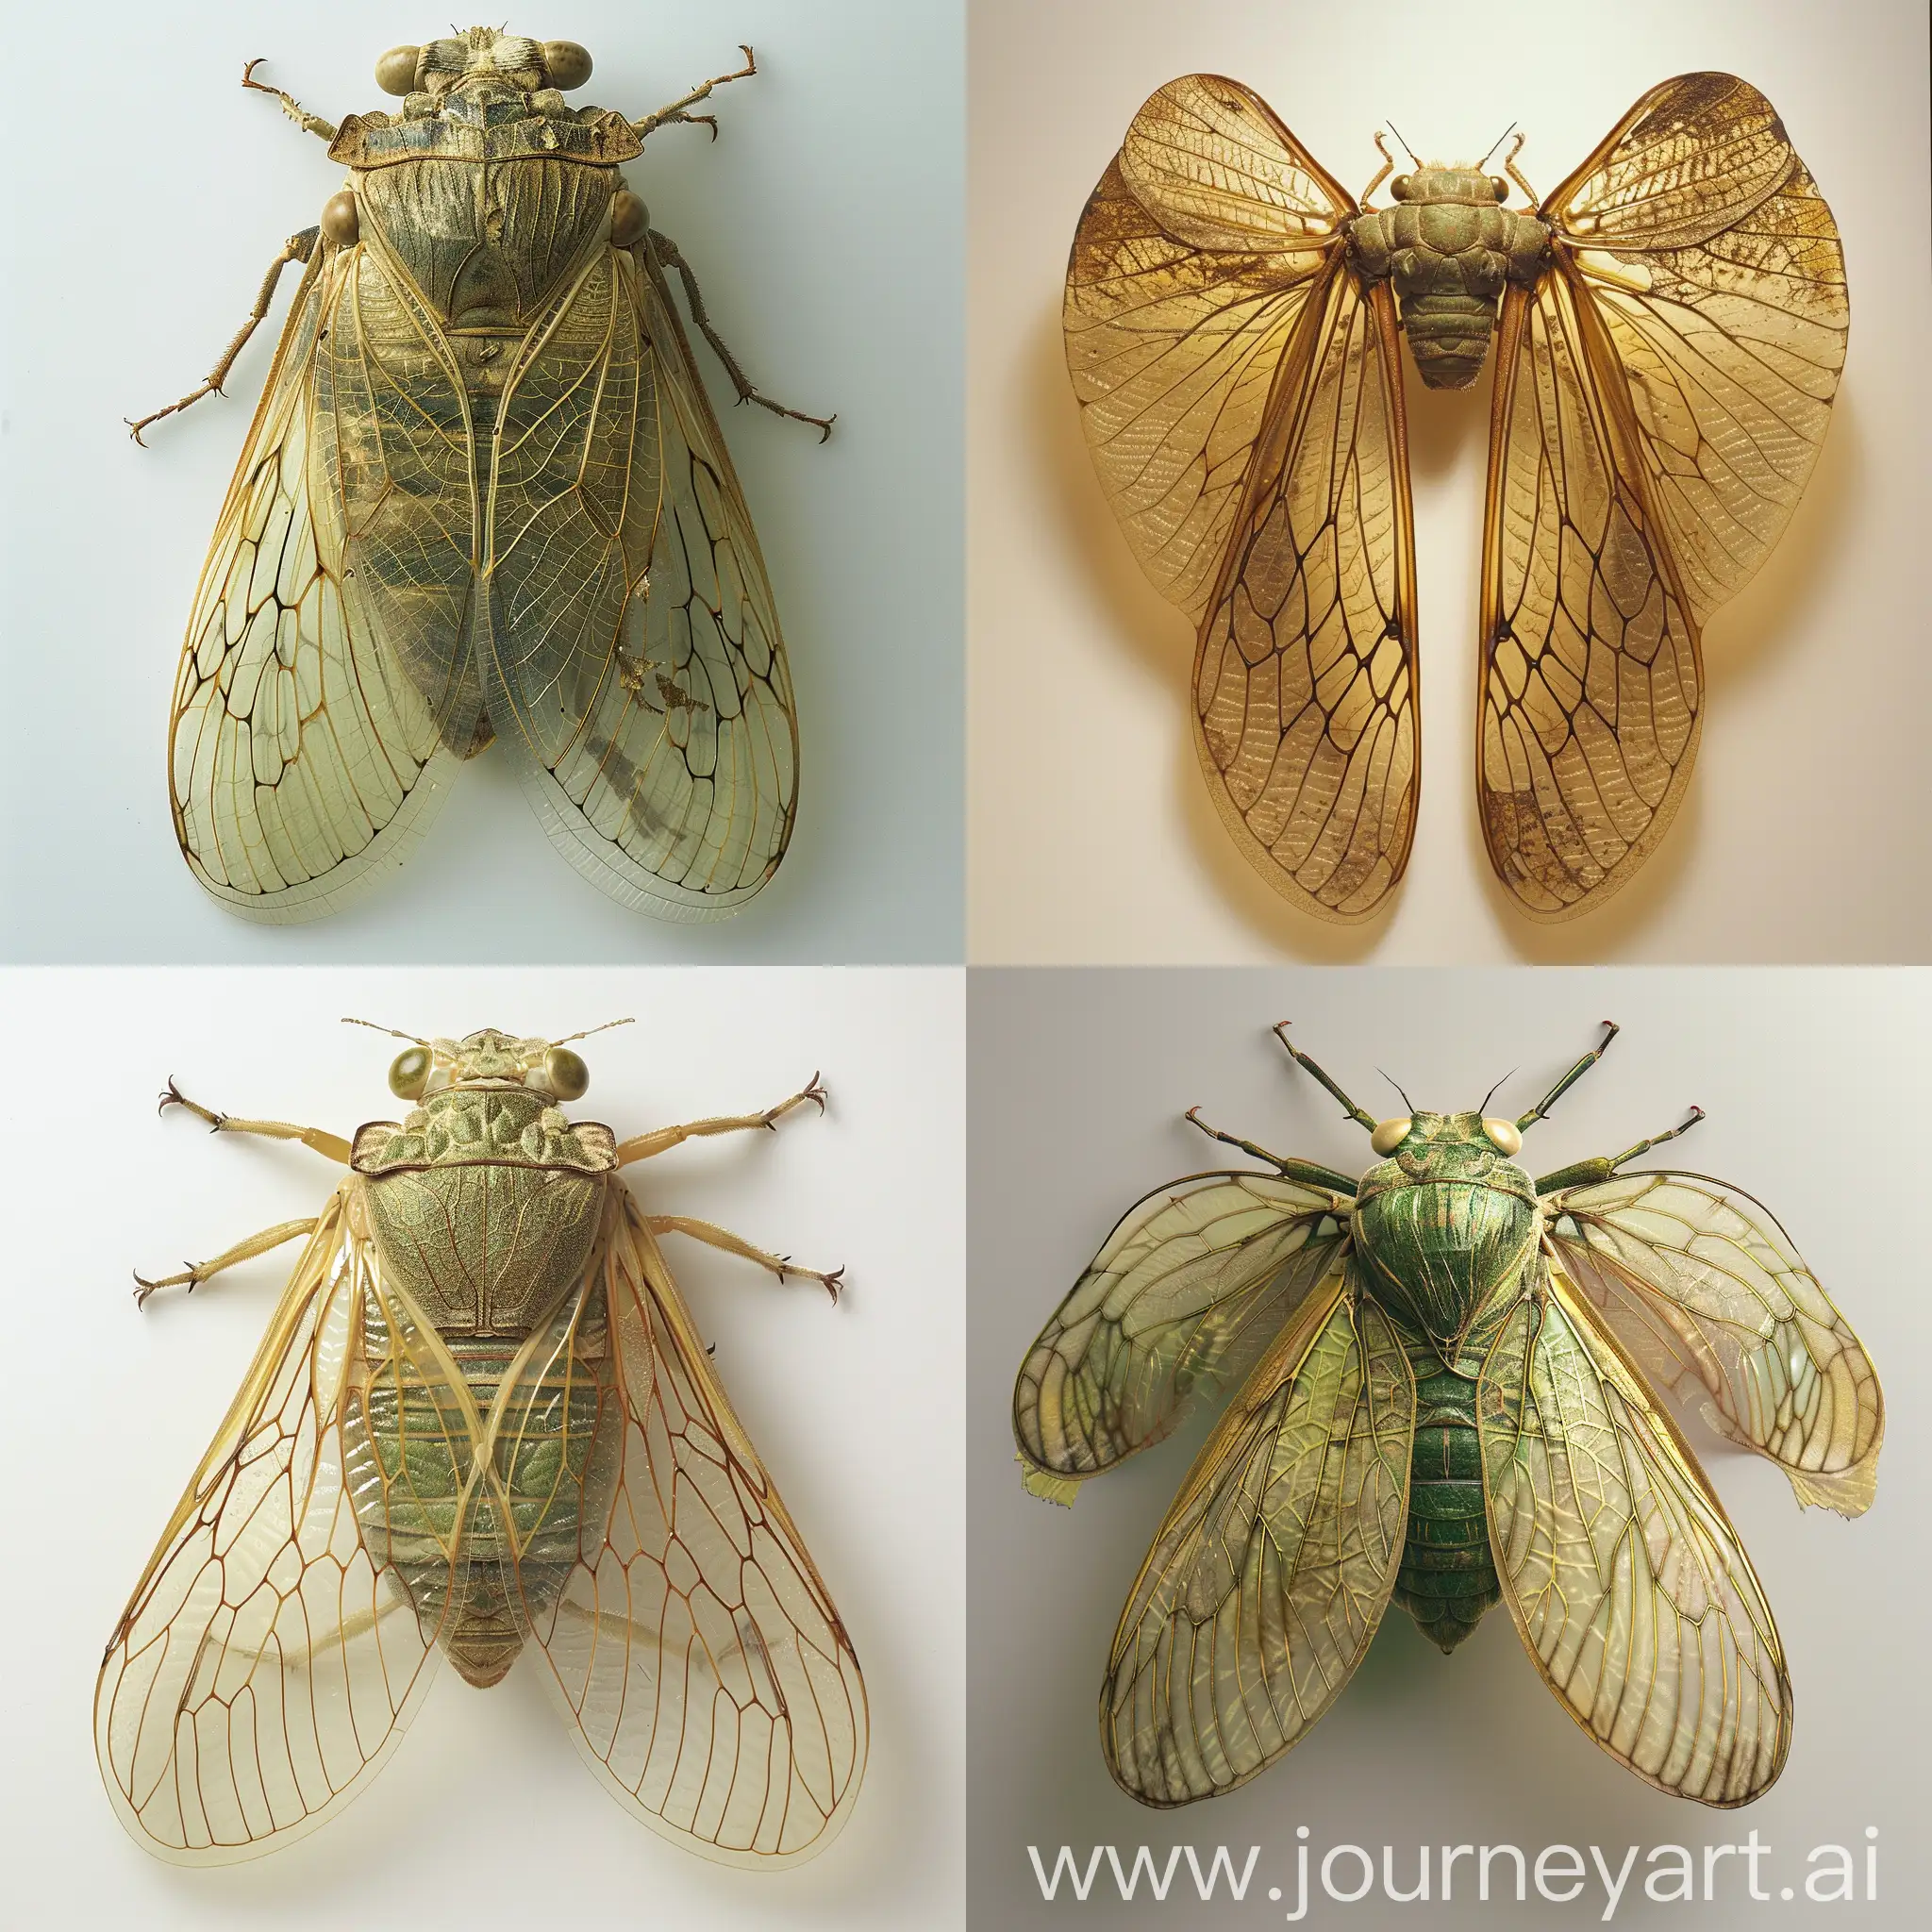 Ethereal-Cicada-with-Broad-SemiTransparent-Wings-in-Autumnal-Decay